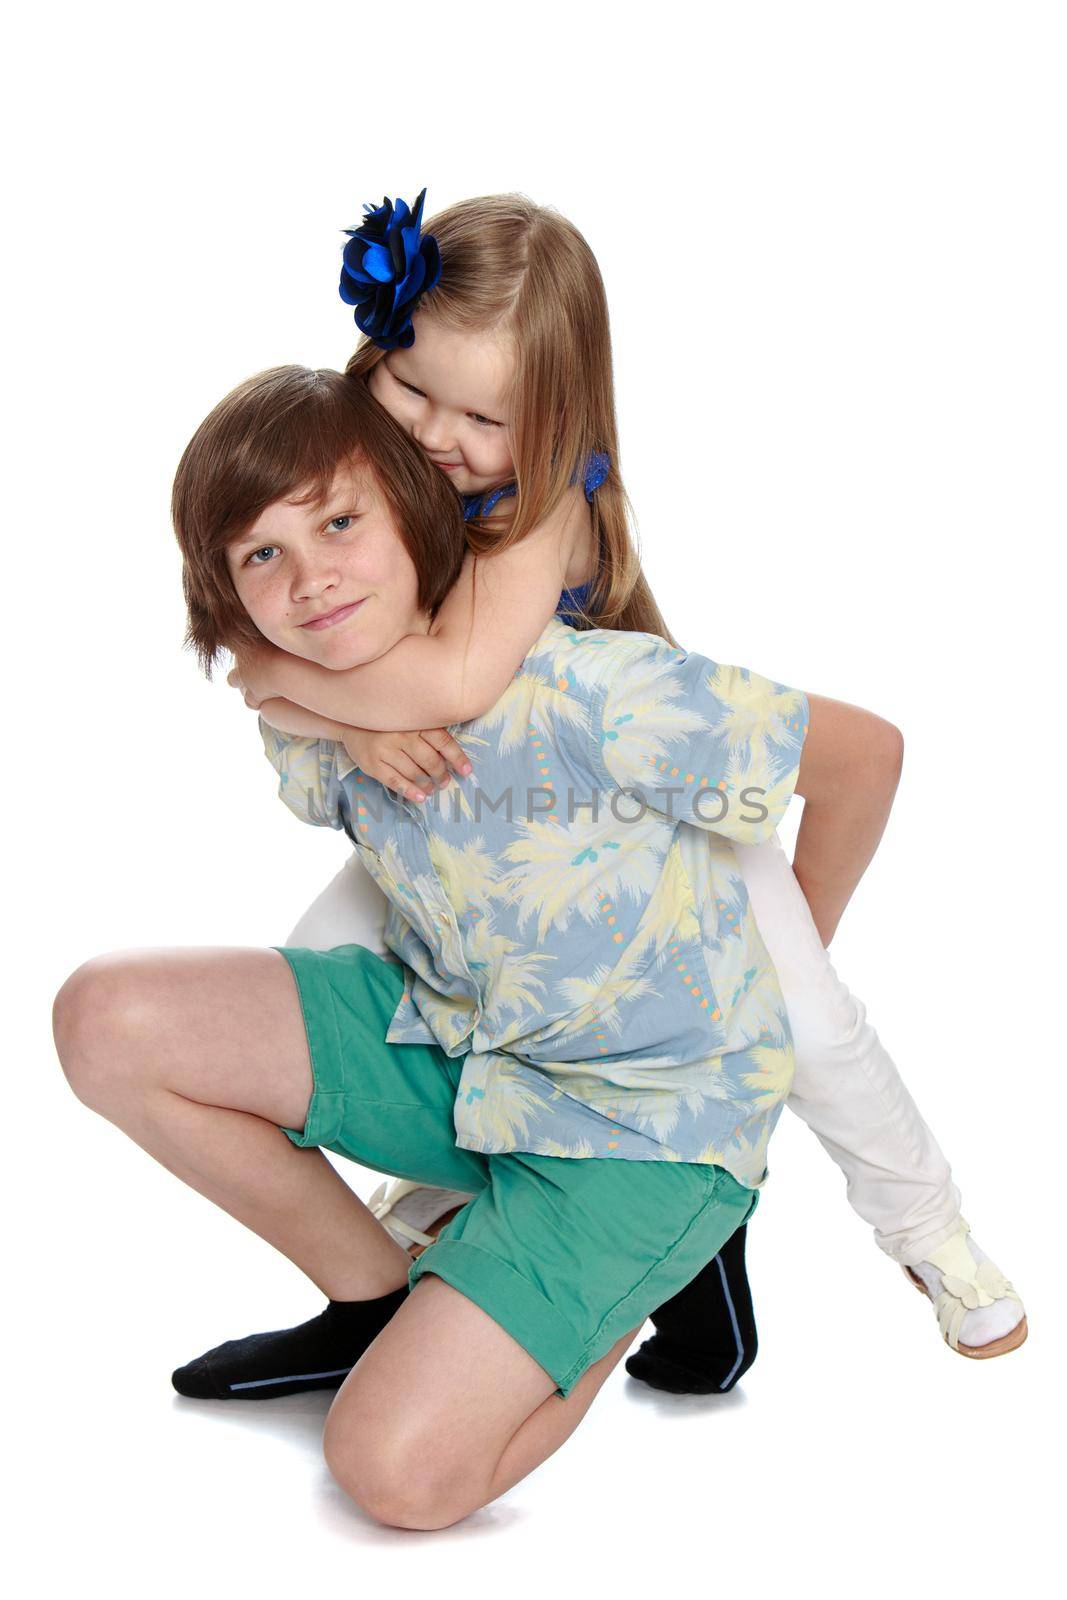 Gentle little girl hugging his neck of his older brother - Isolated on white background